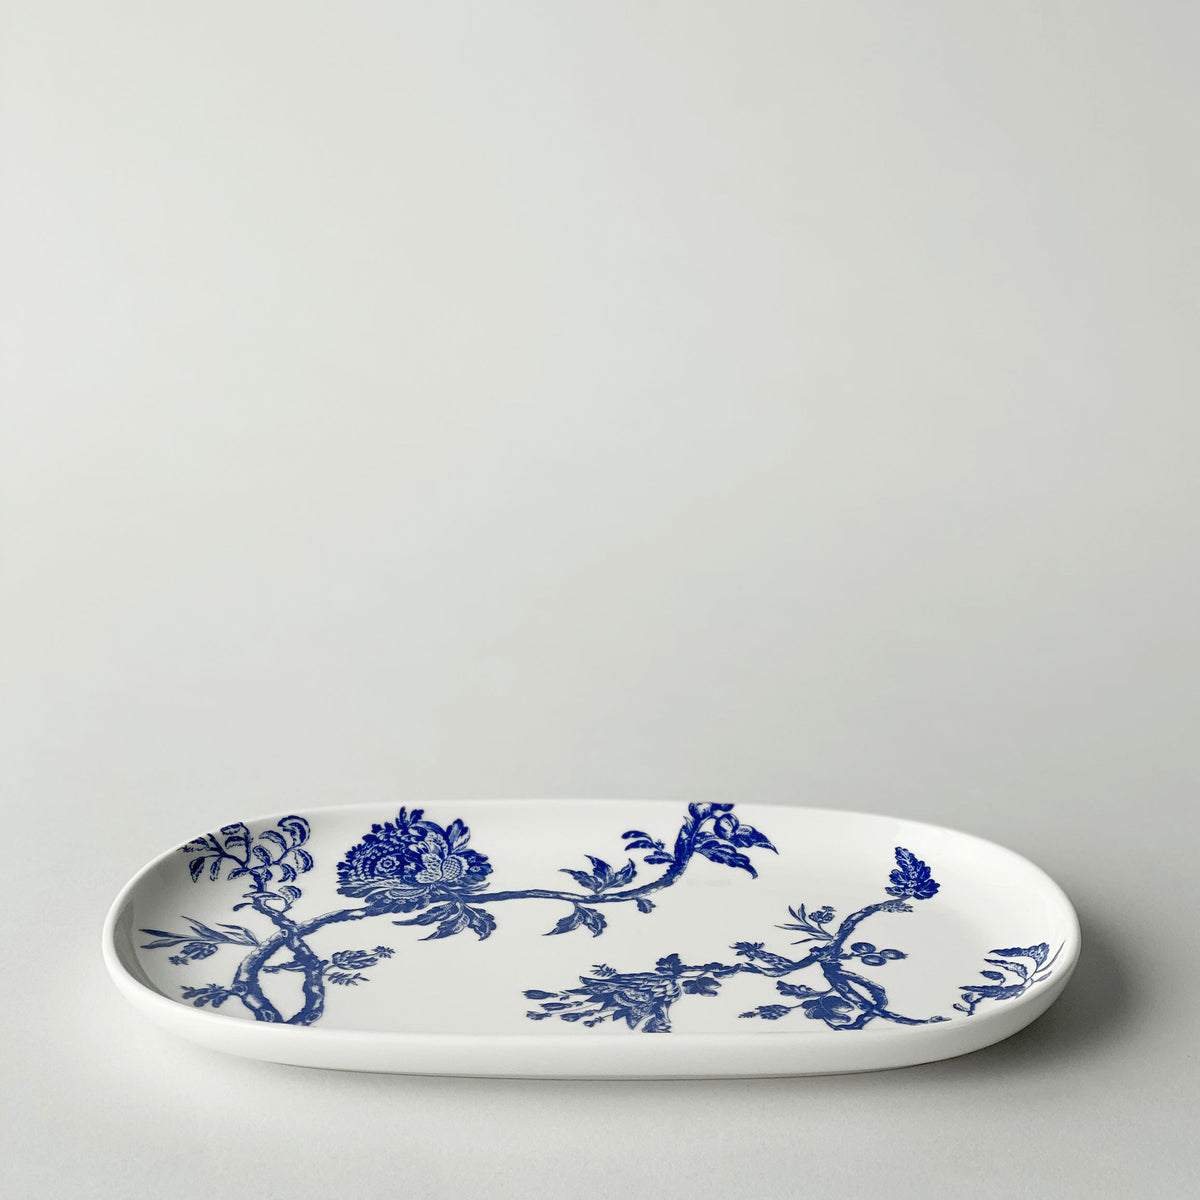 An elegant Caskata Artisanal Home Arcadia Small Oval Tray, perfect for serving appetizers, adorned with delicate blue and white porcelain birds.